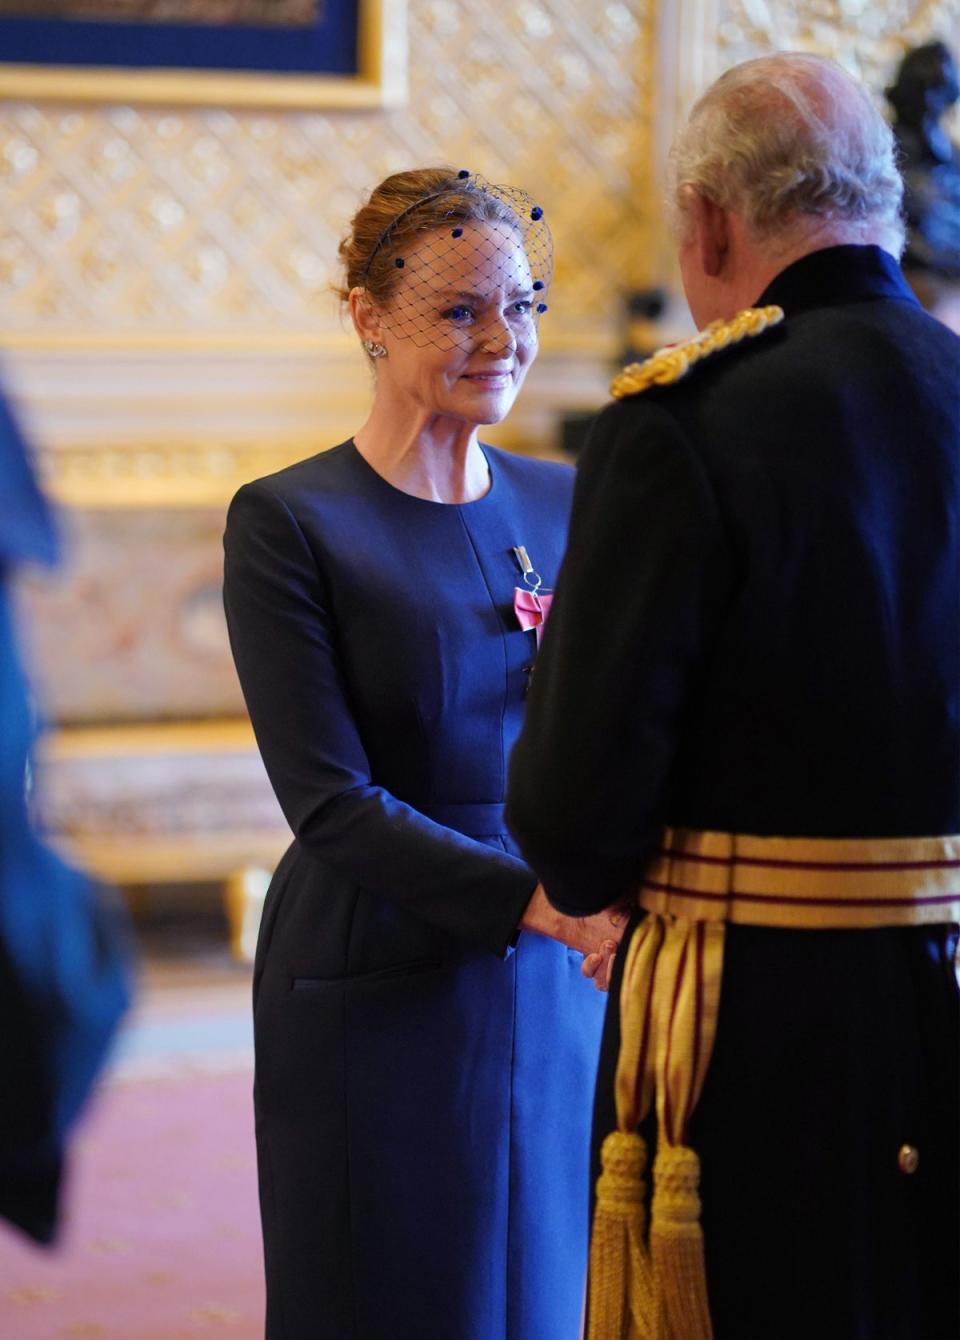 Stella McCartney being made a Commander of the Order of the British Empire by King Charles III (PA)